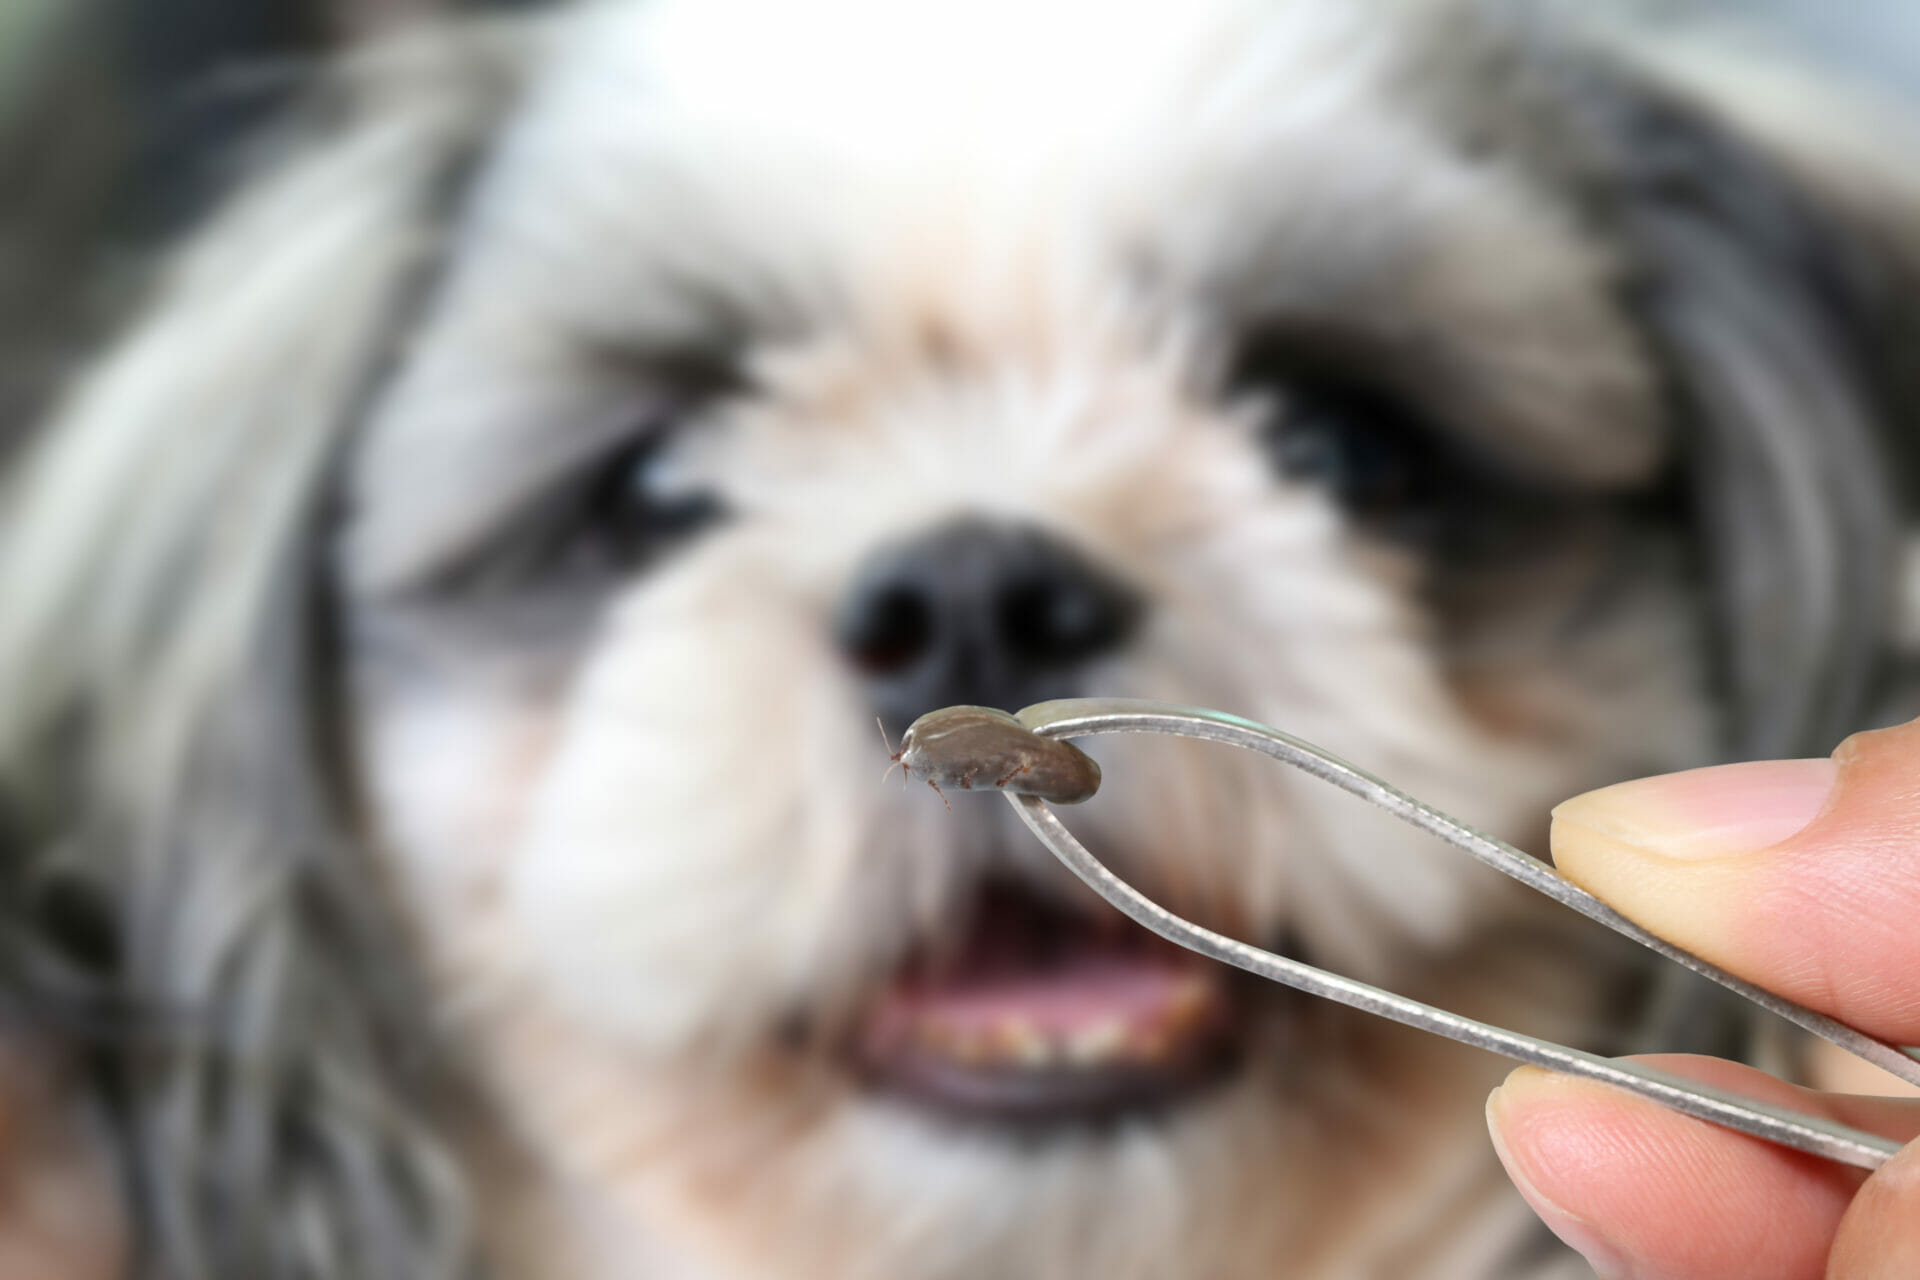 Dog with a close-up of a tick